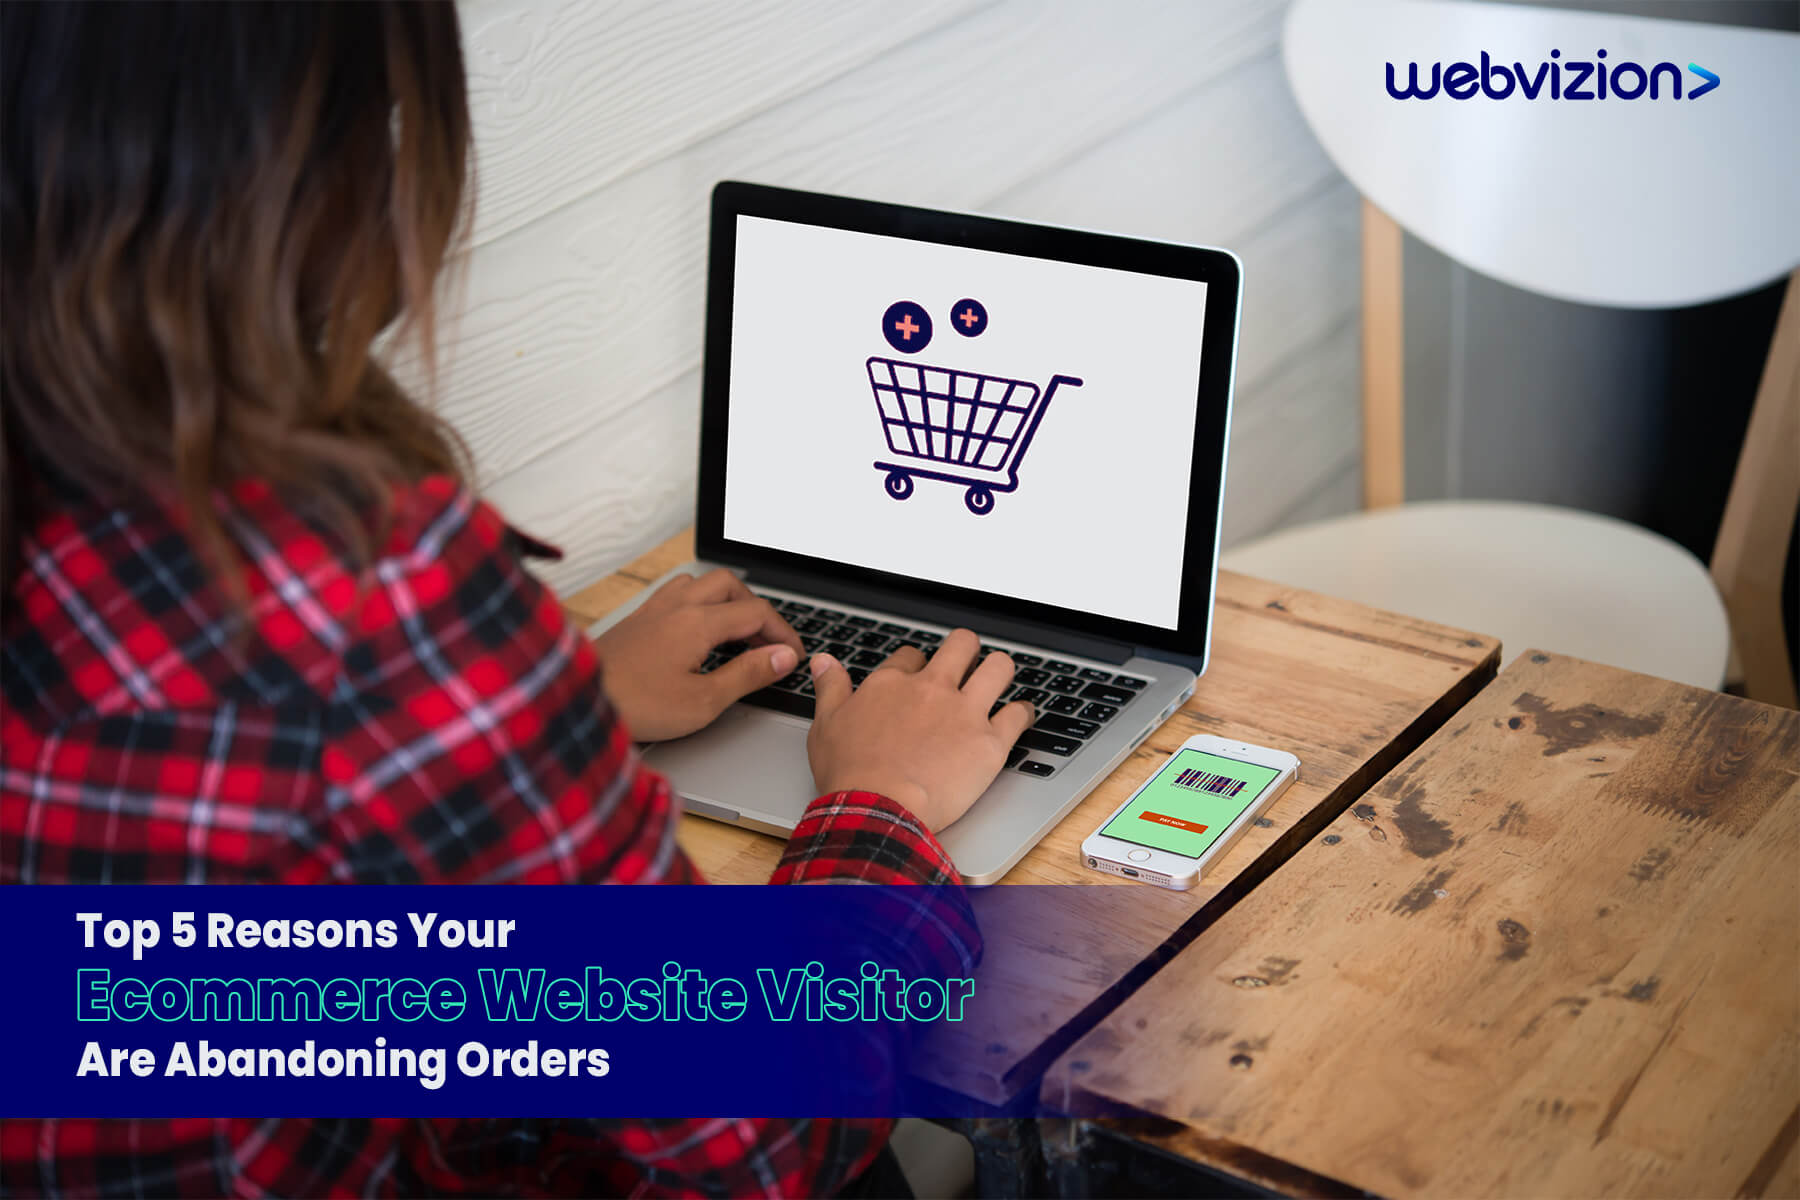 Top 5 Reasons Your Ecommerce Website Visitor Are Abandoning Orders-Webvizion Global